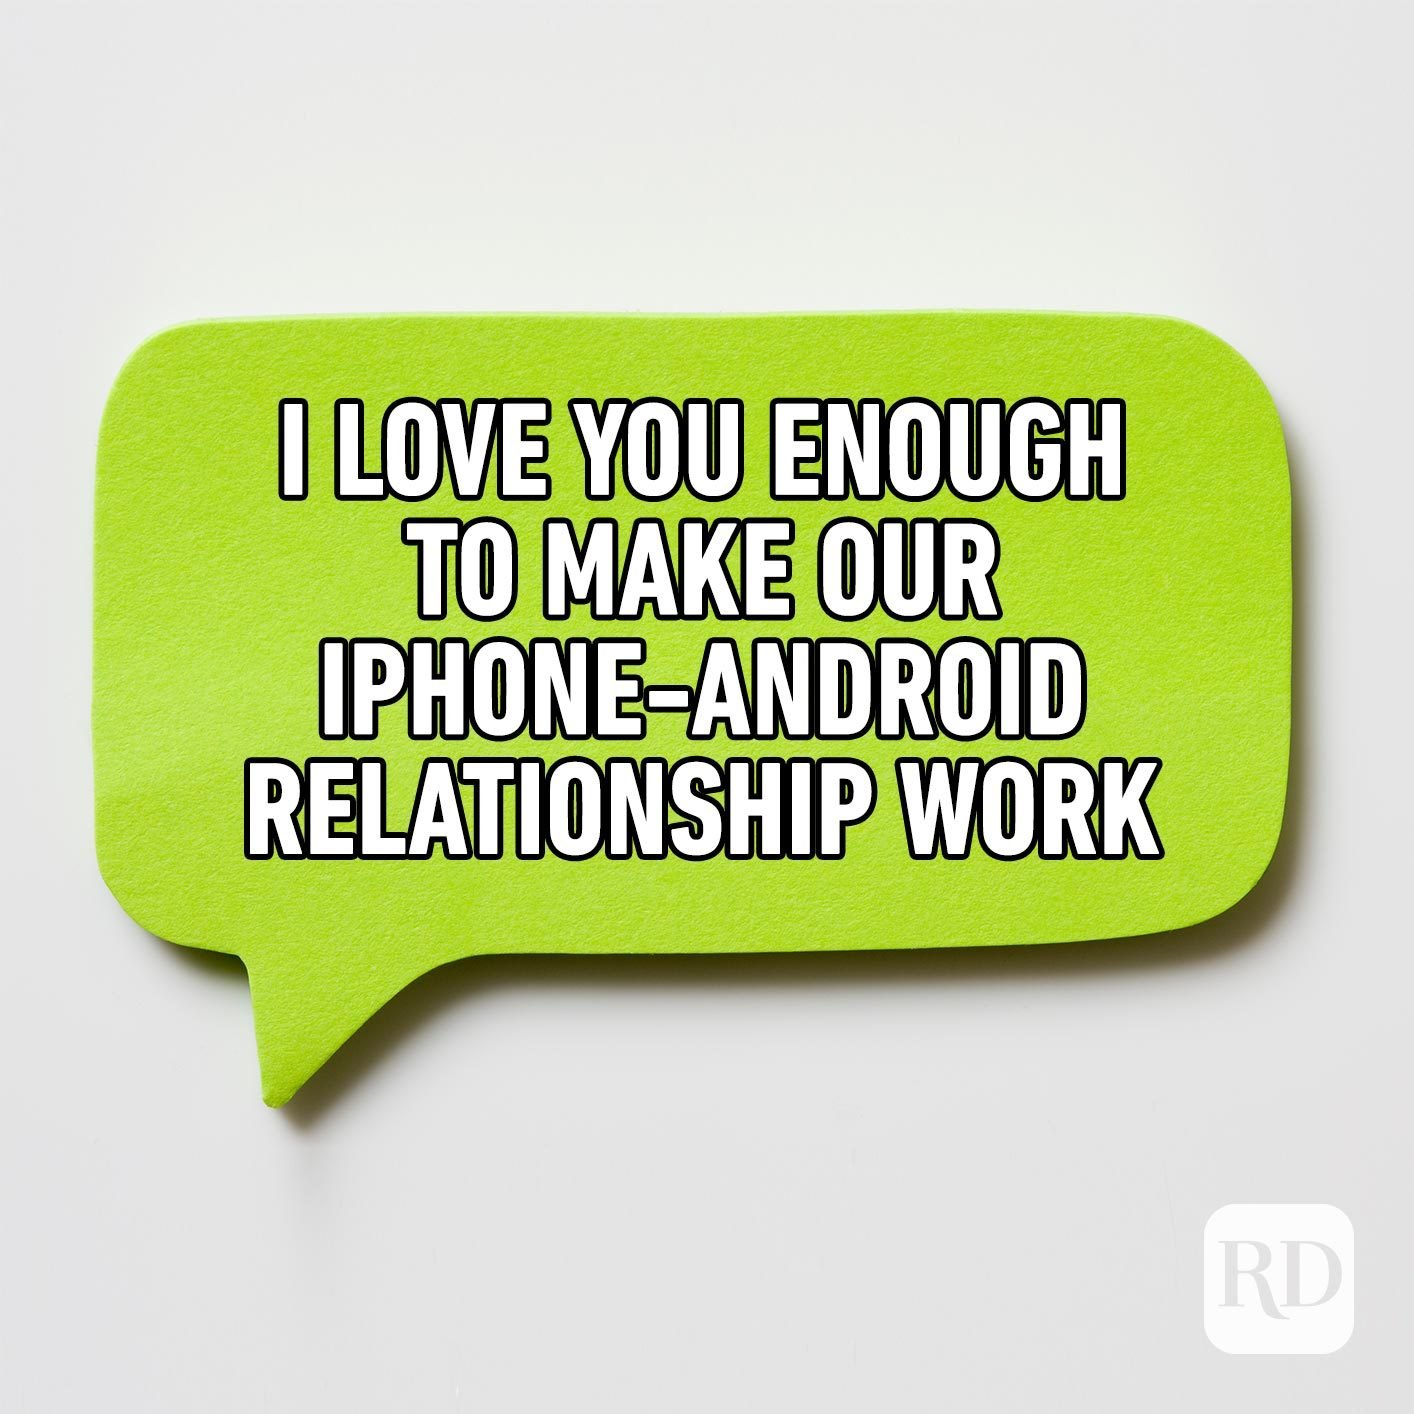 I like you enough to make our IPhone-Android relationship work